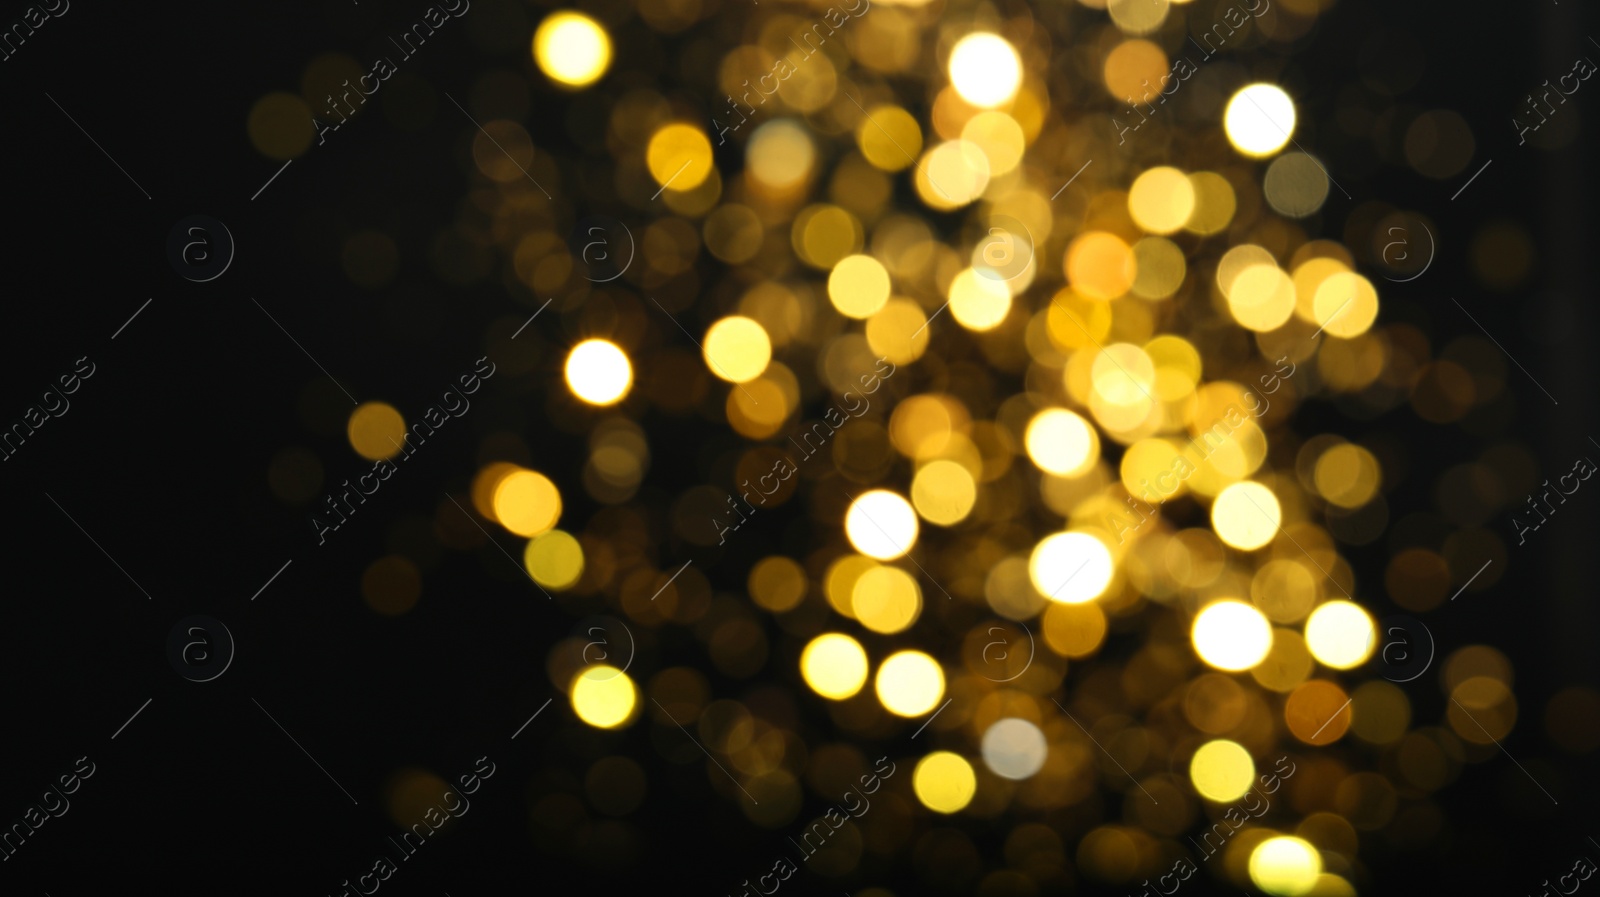 Photo of Blurred view of golden lights on black background. Bokeh effect